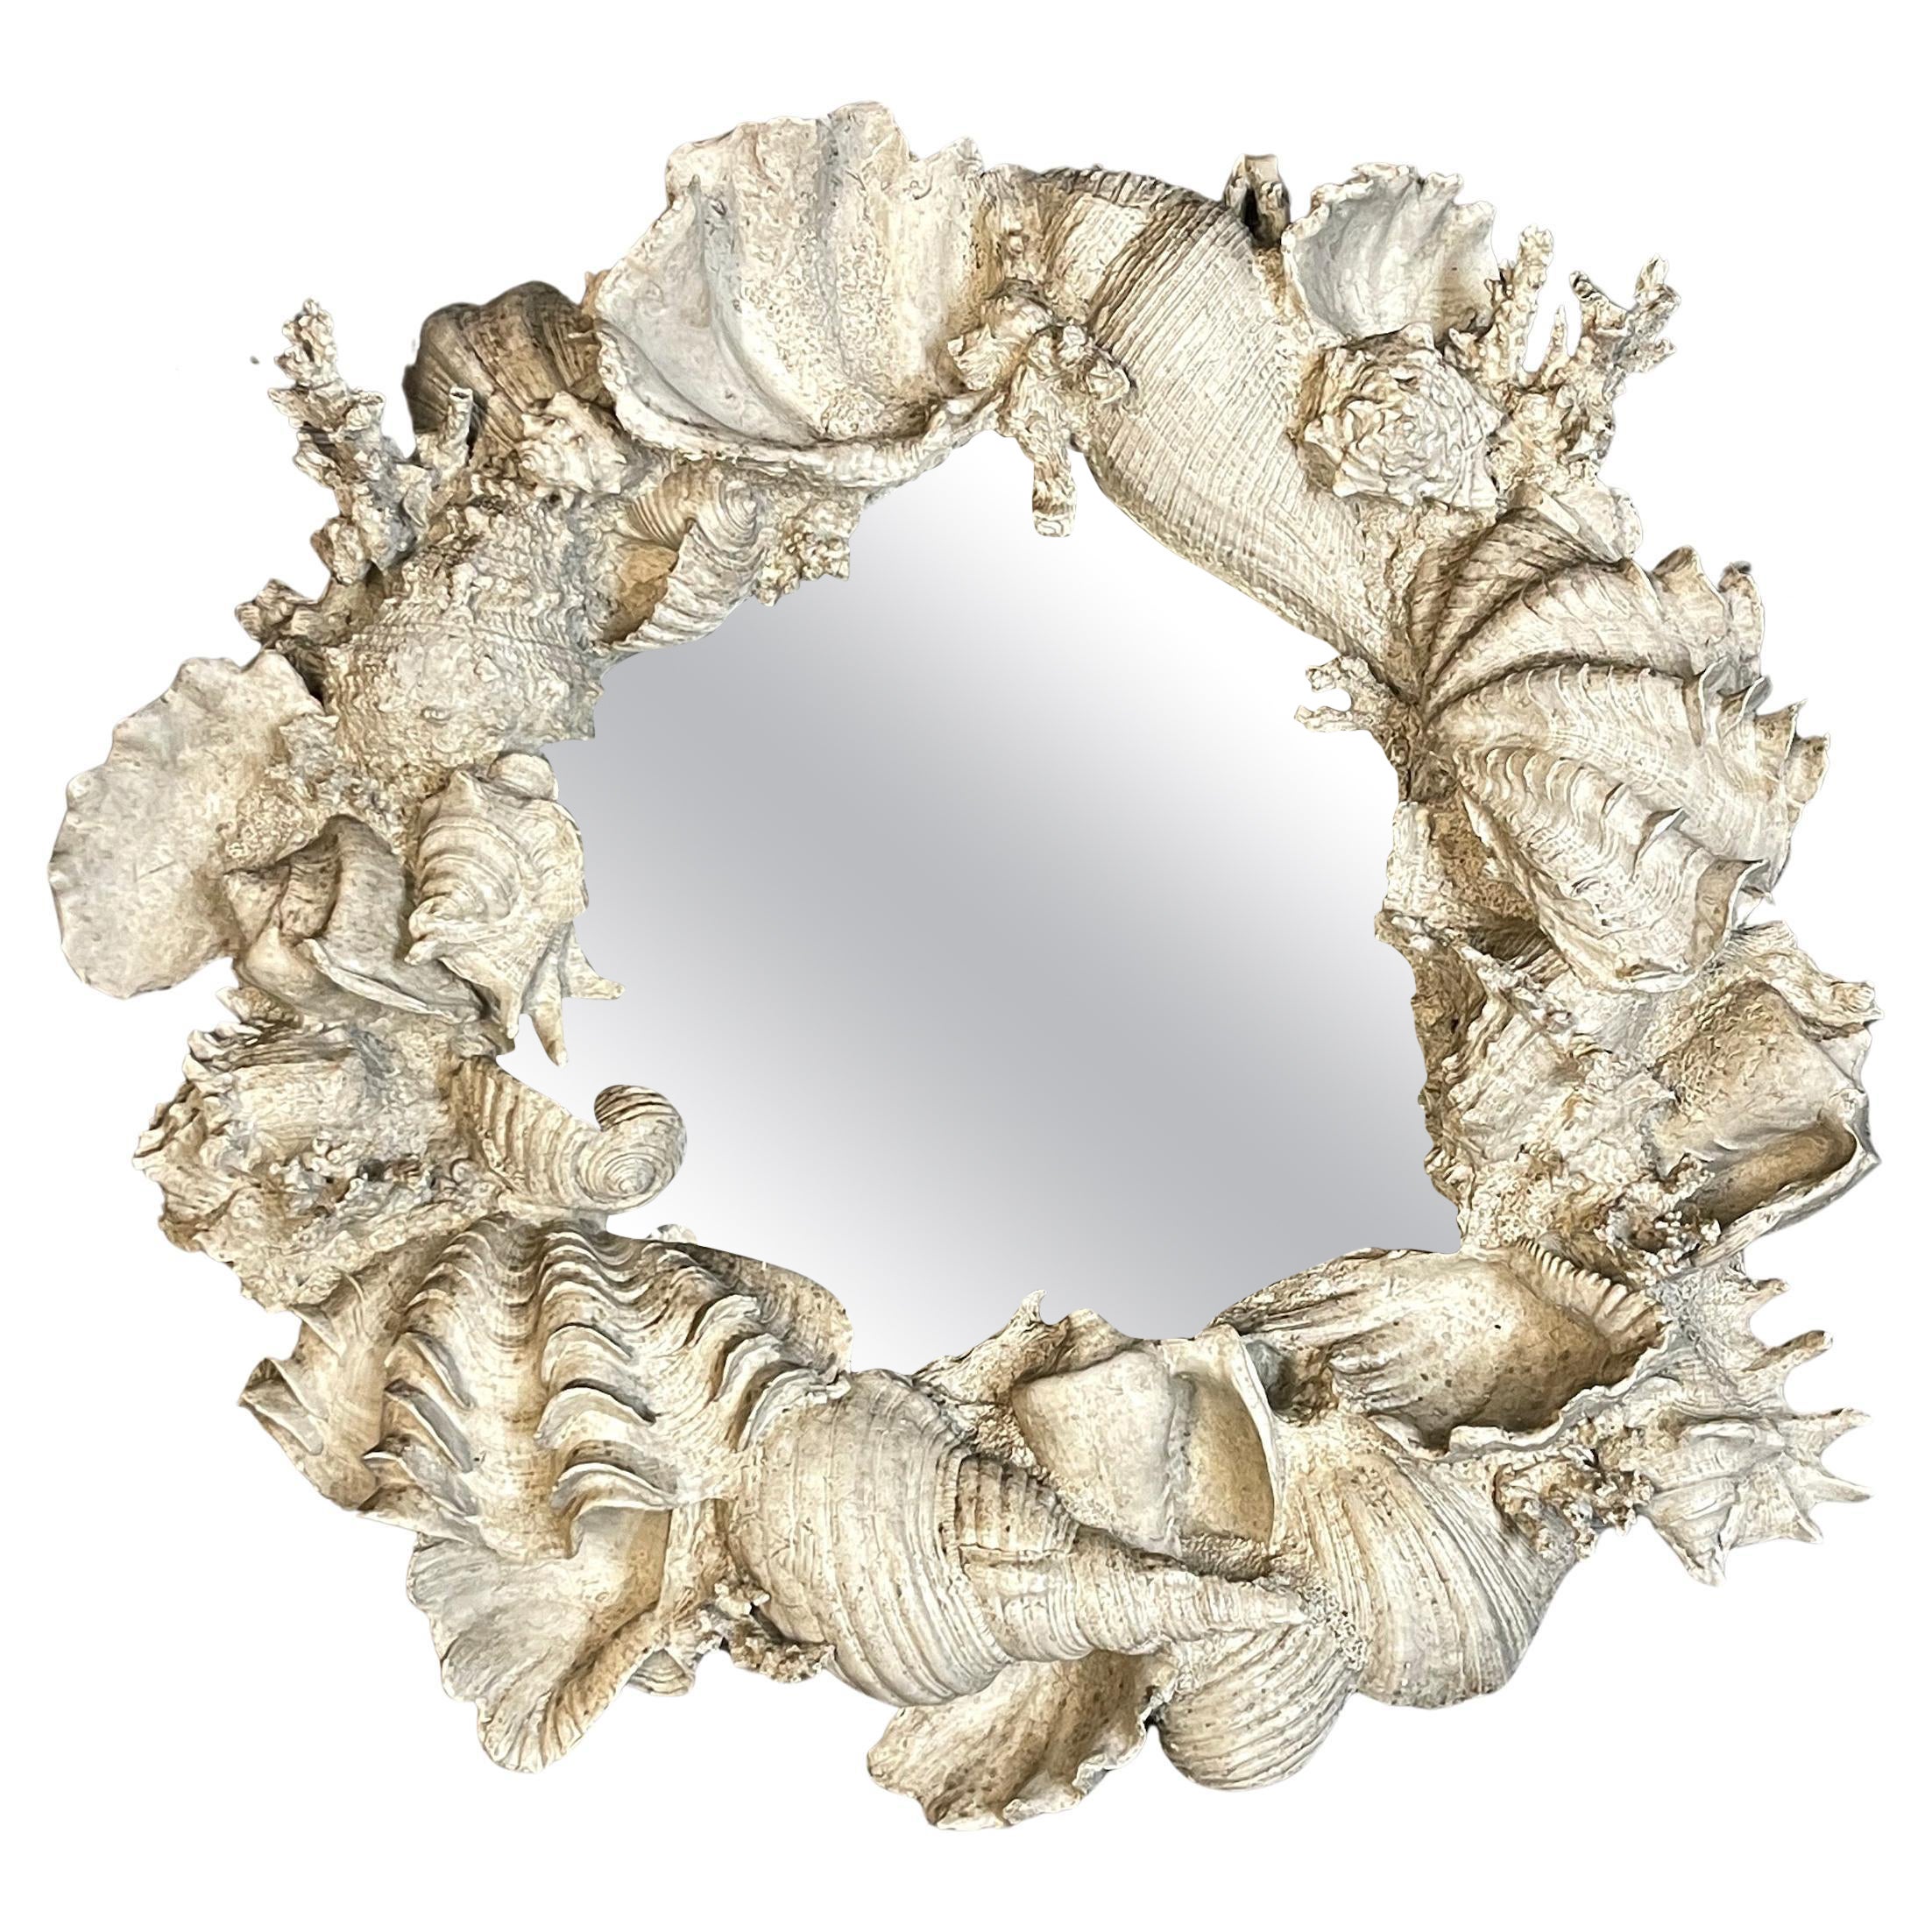 Naturalistic High-Relief Coral and Shell Motif Porthole Mirror